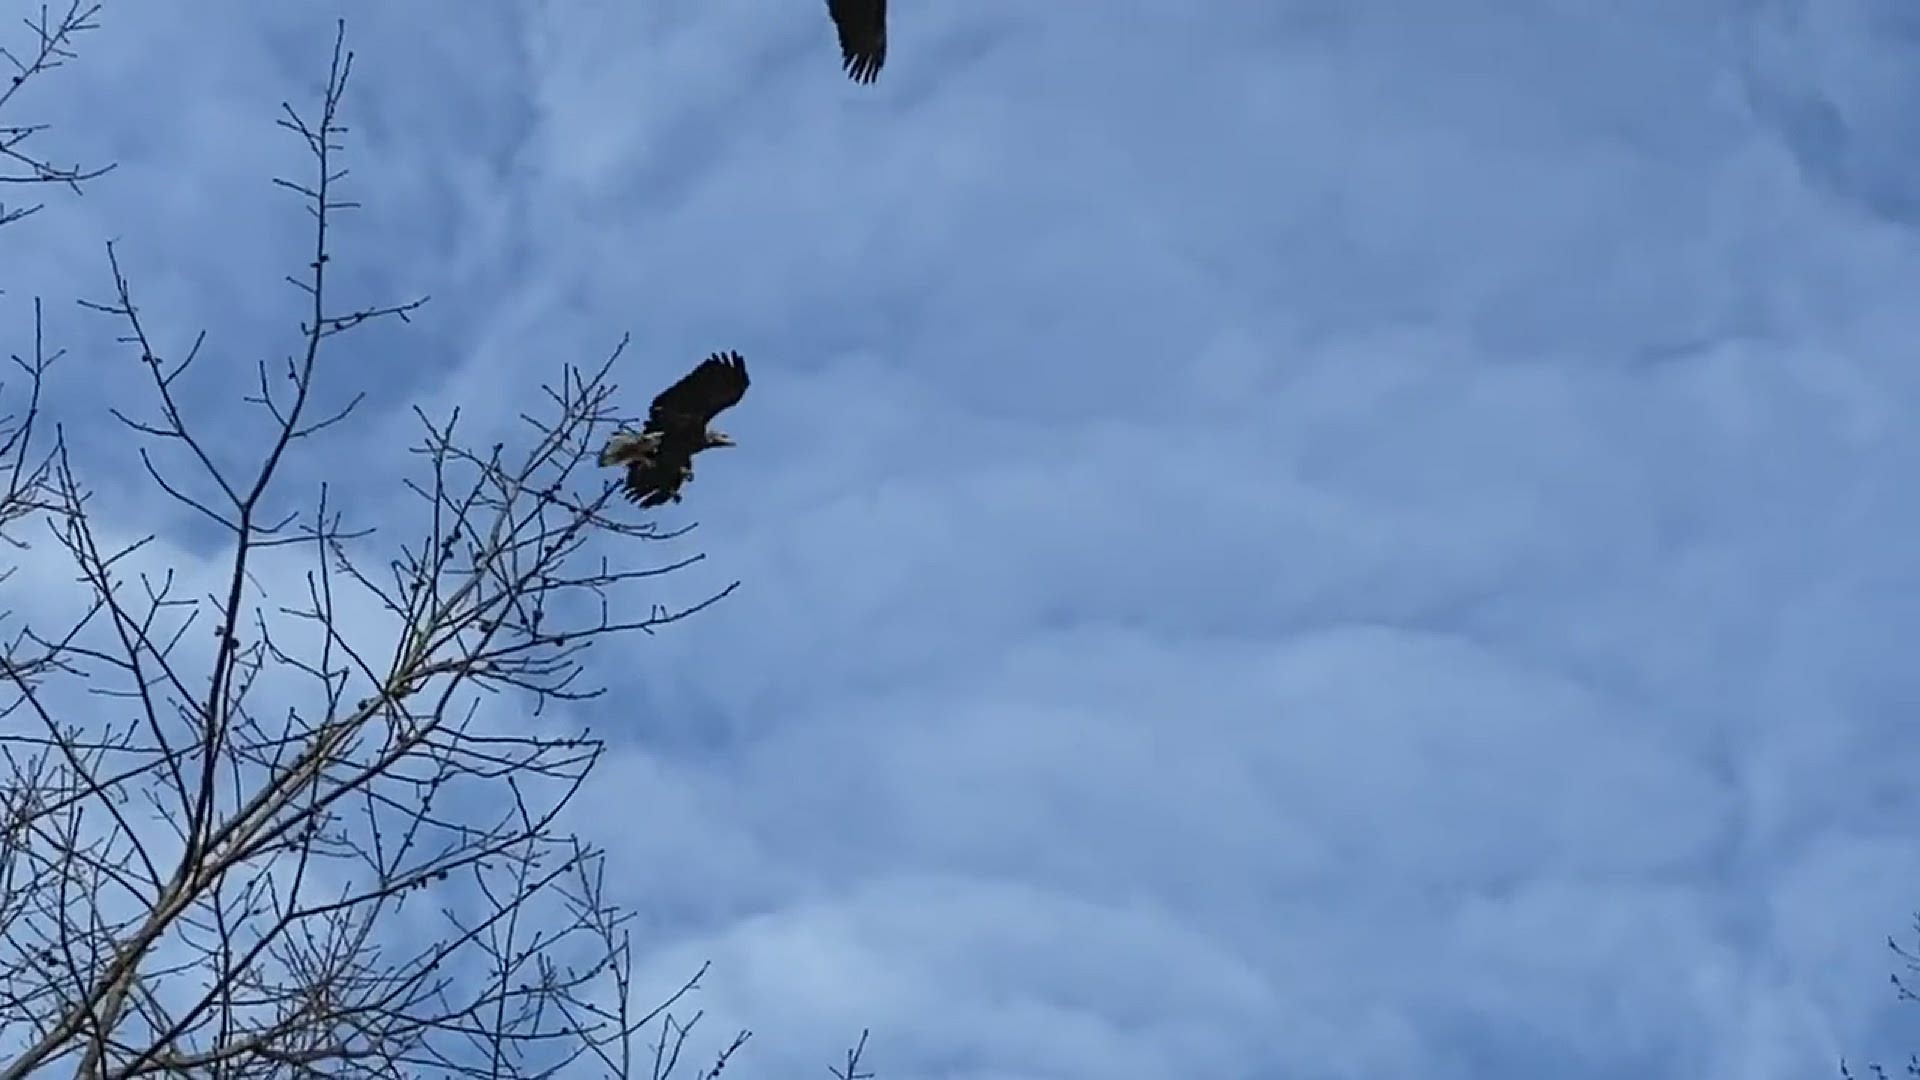 Eagles fighting over the perch in the tree. Slow motion
Credit: Cheryl Paluso